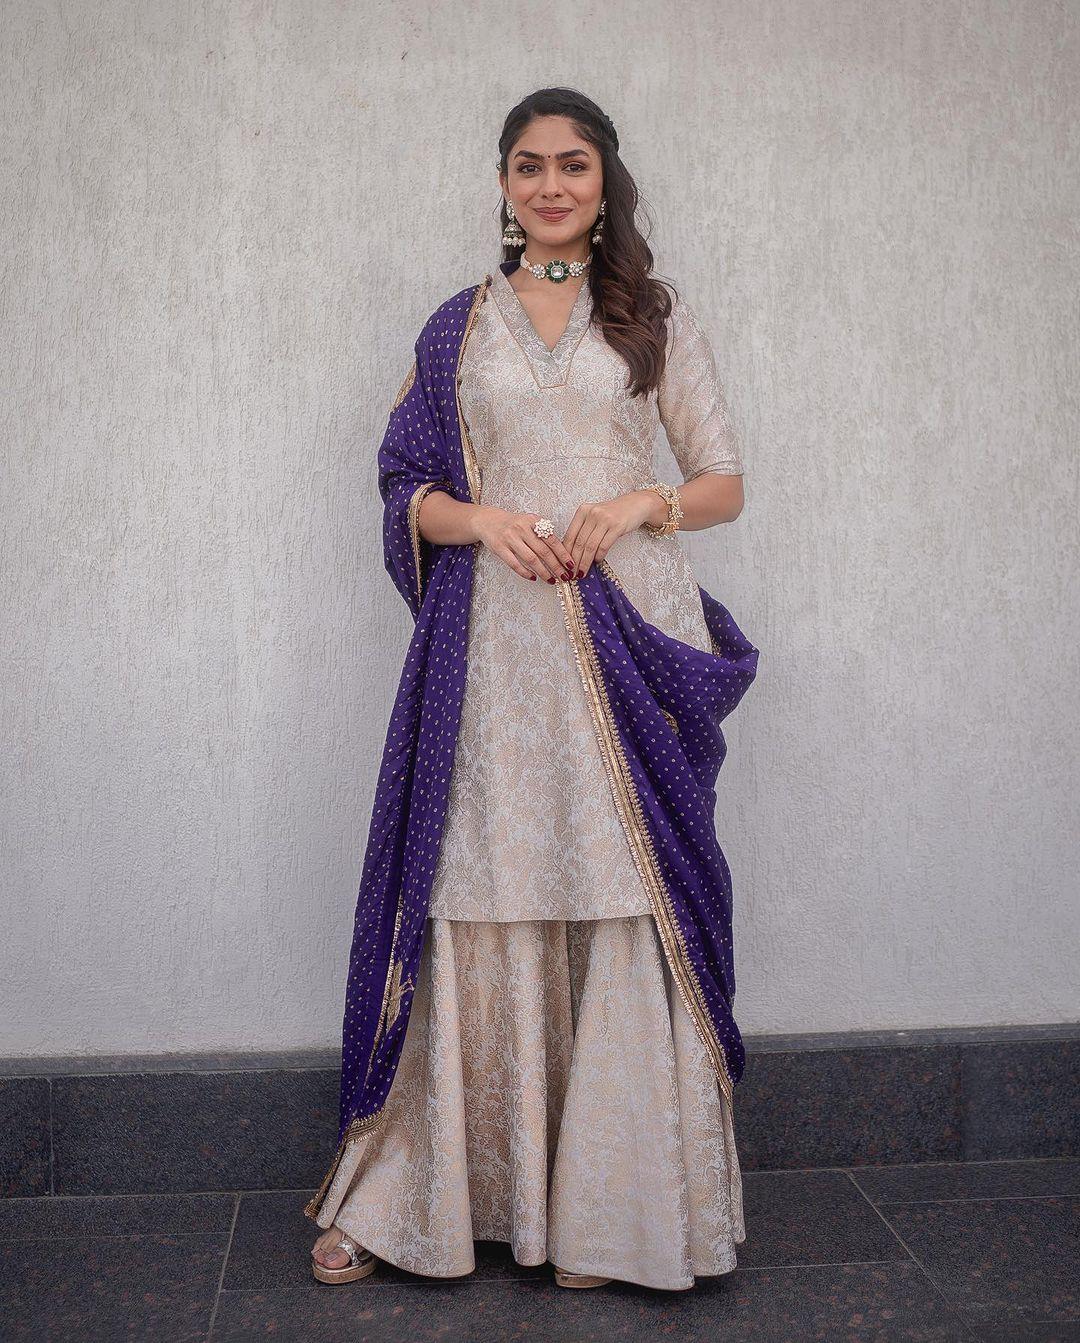 In this beautiful look, Mrunal wore an off-white embroidered kurta paired with a matching sharara, complemented by a purple dupatta